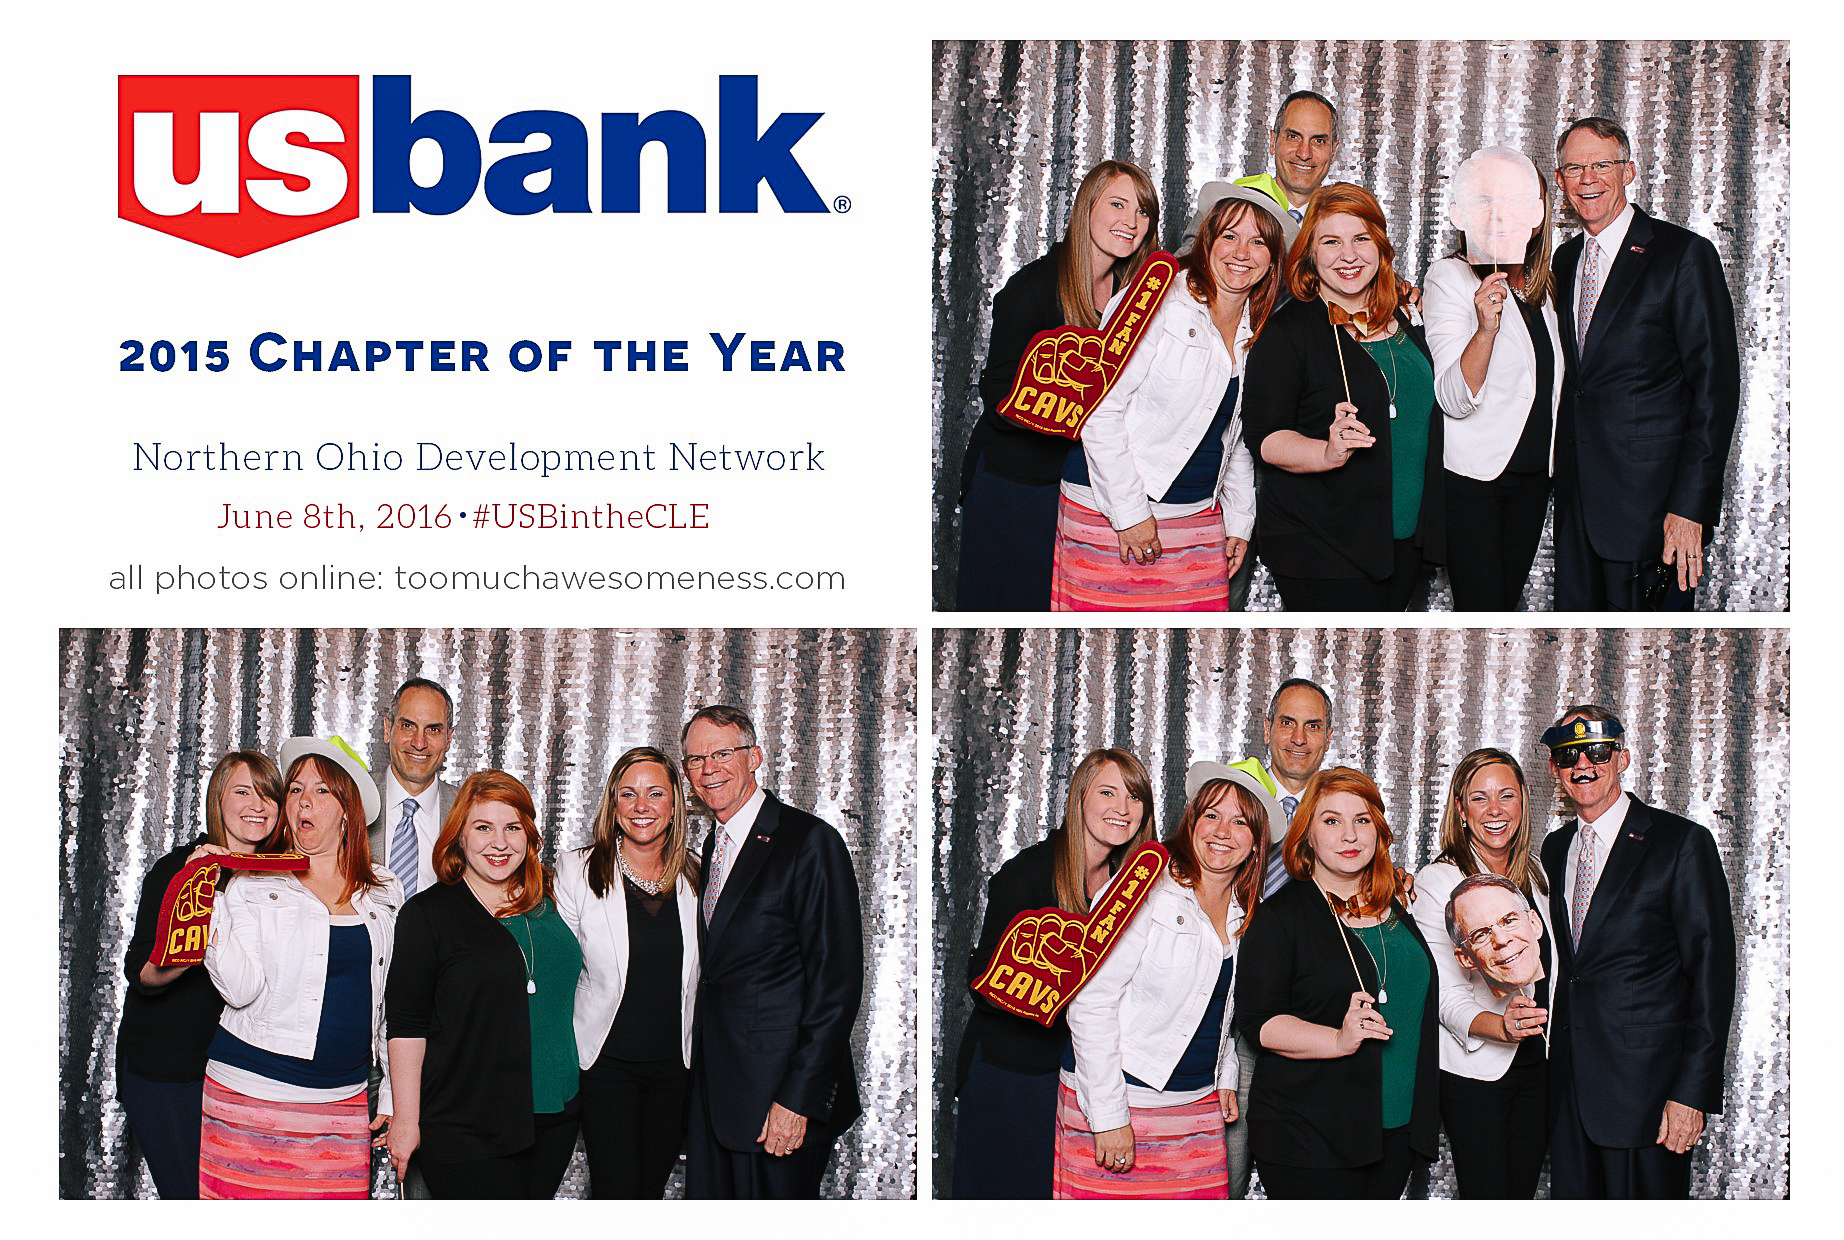 00152-US Bank Event Phtoobooth in Cleveland Too Much Awesomeness-20160608.jpg